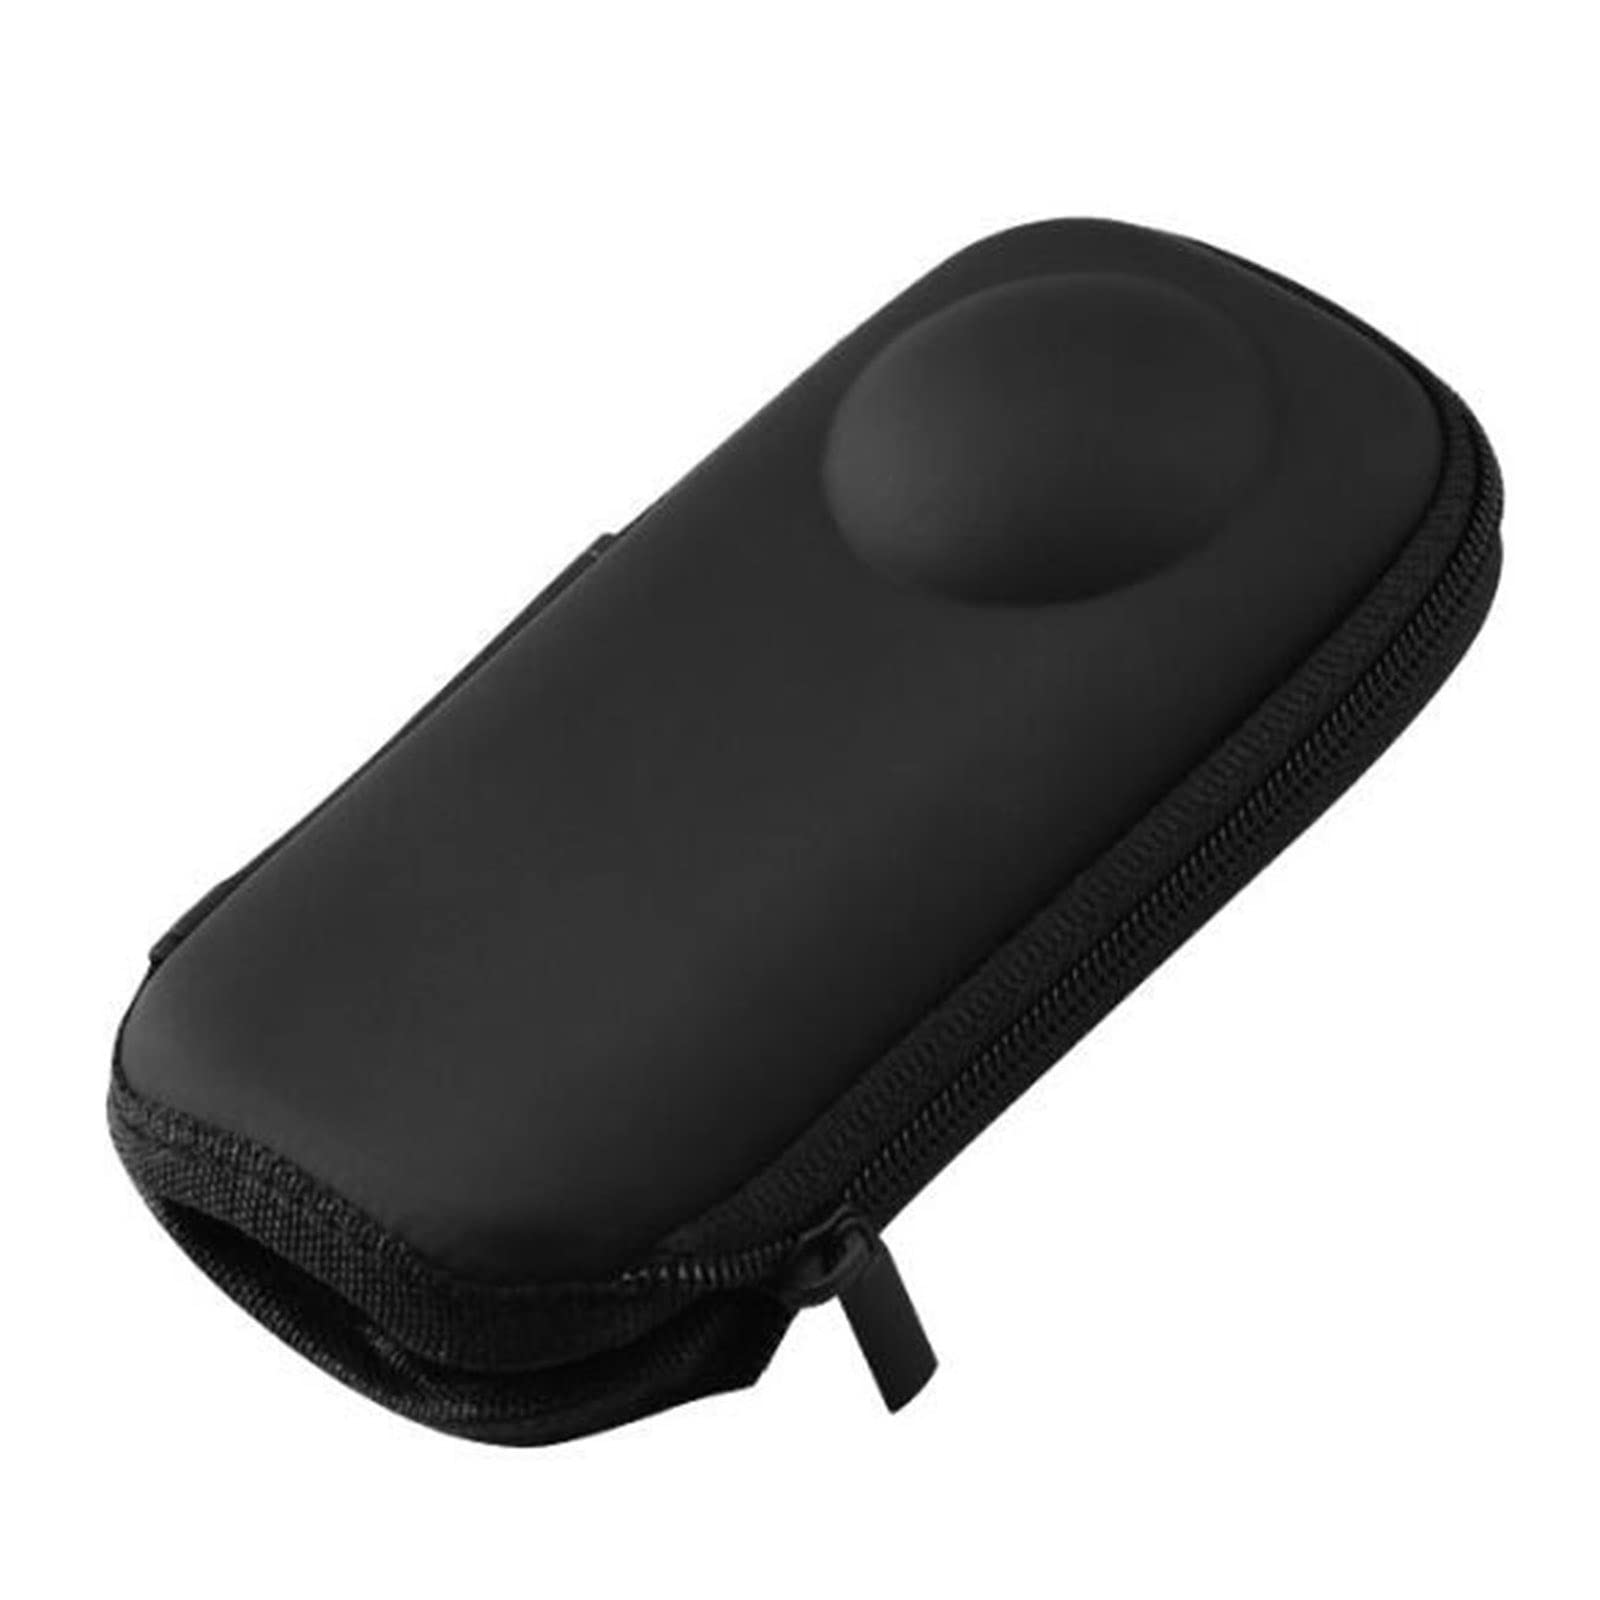 HUAYUWA Carry Case Compatible for Insta360 One X3/One X2/One X Camera Waterproof Protective Storage Bag Accessories